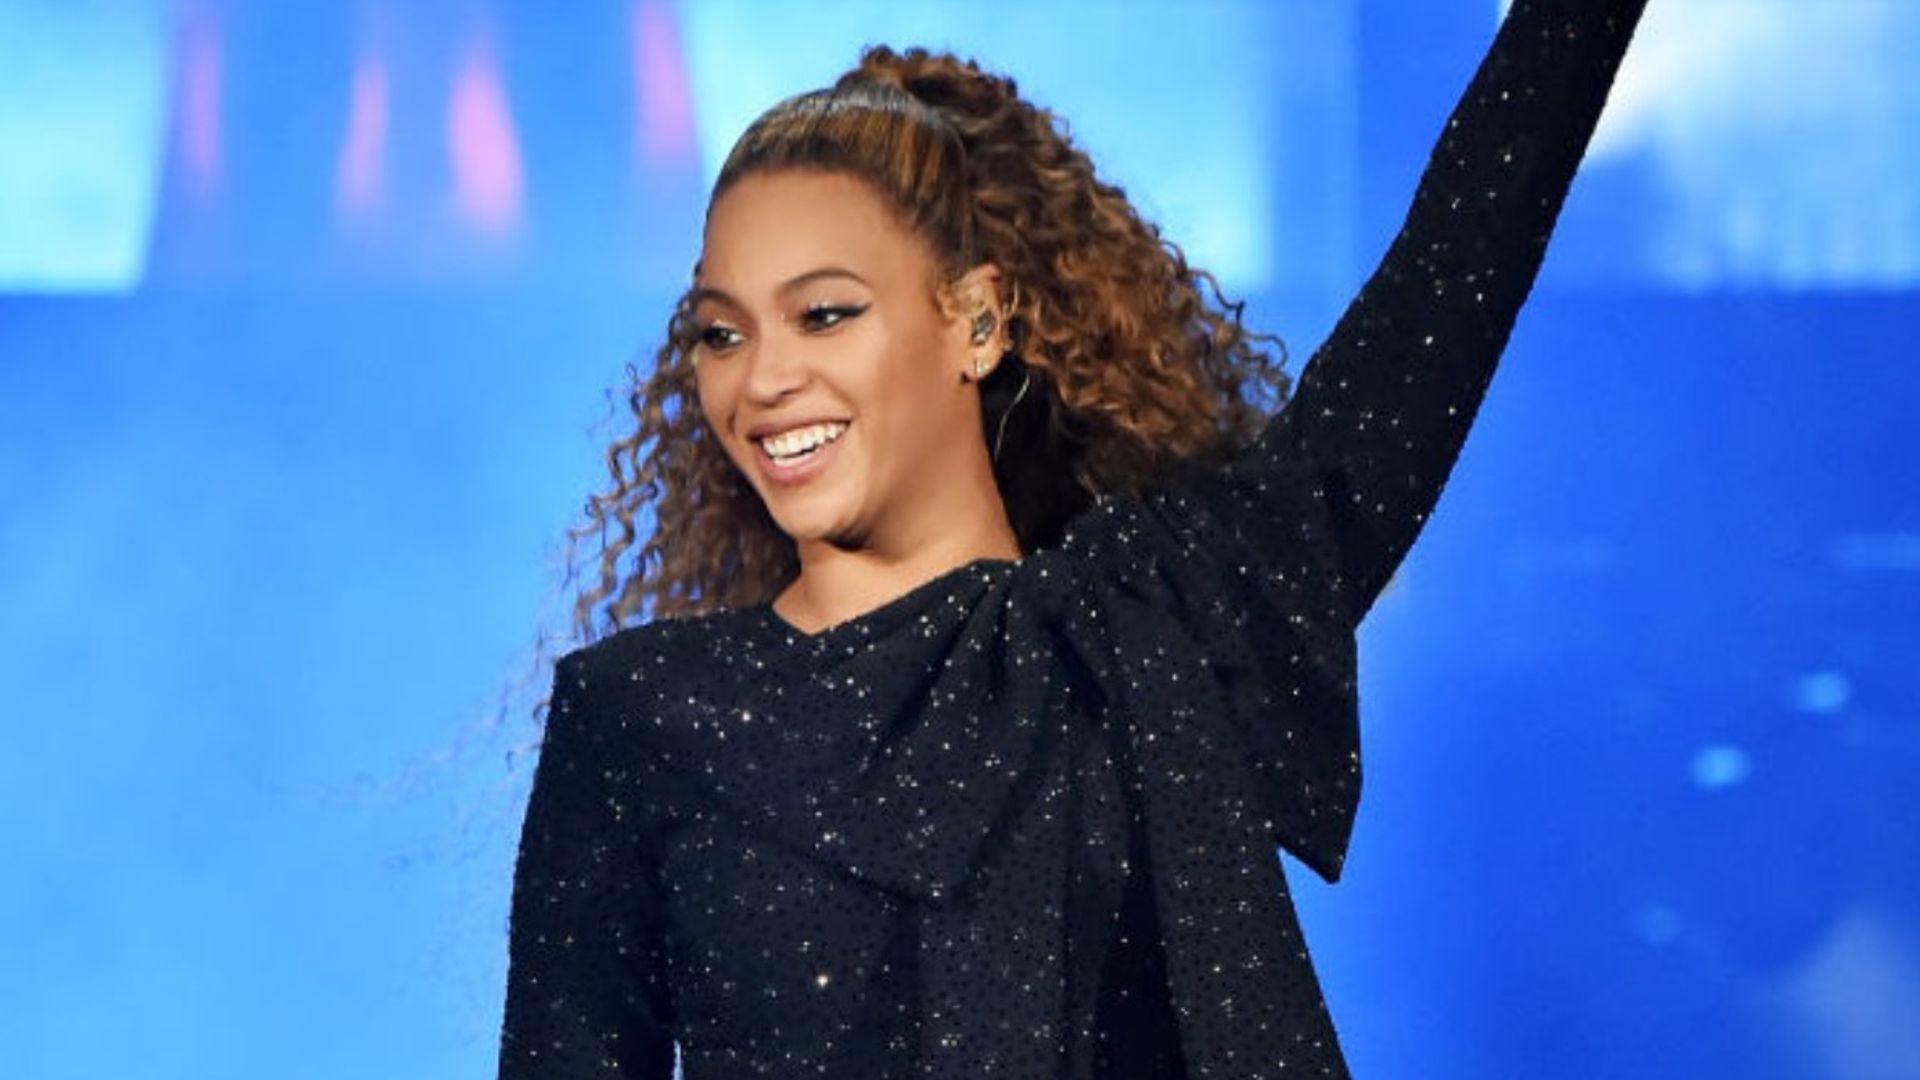 Beyoncé's throwback talent show video will give you chills | HELLO!